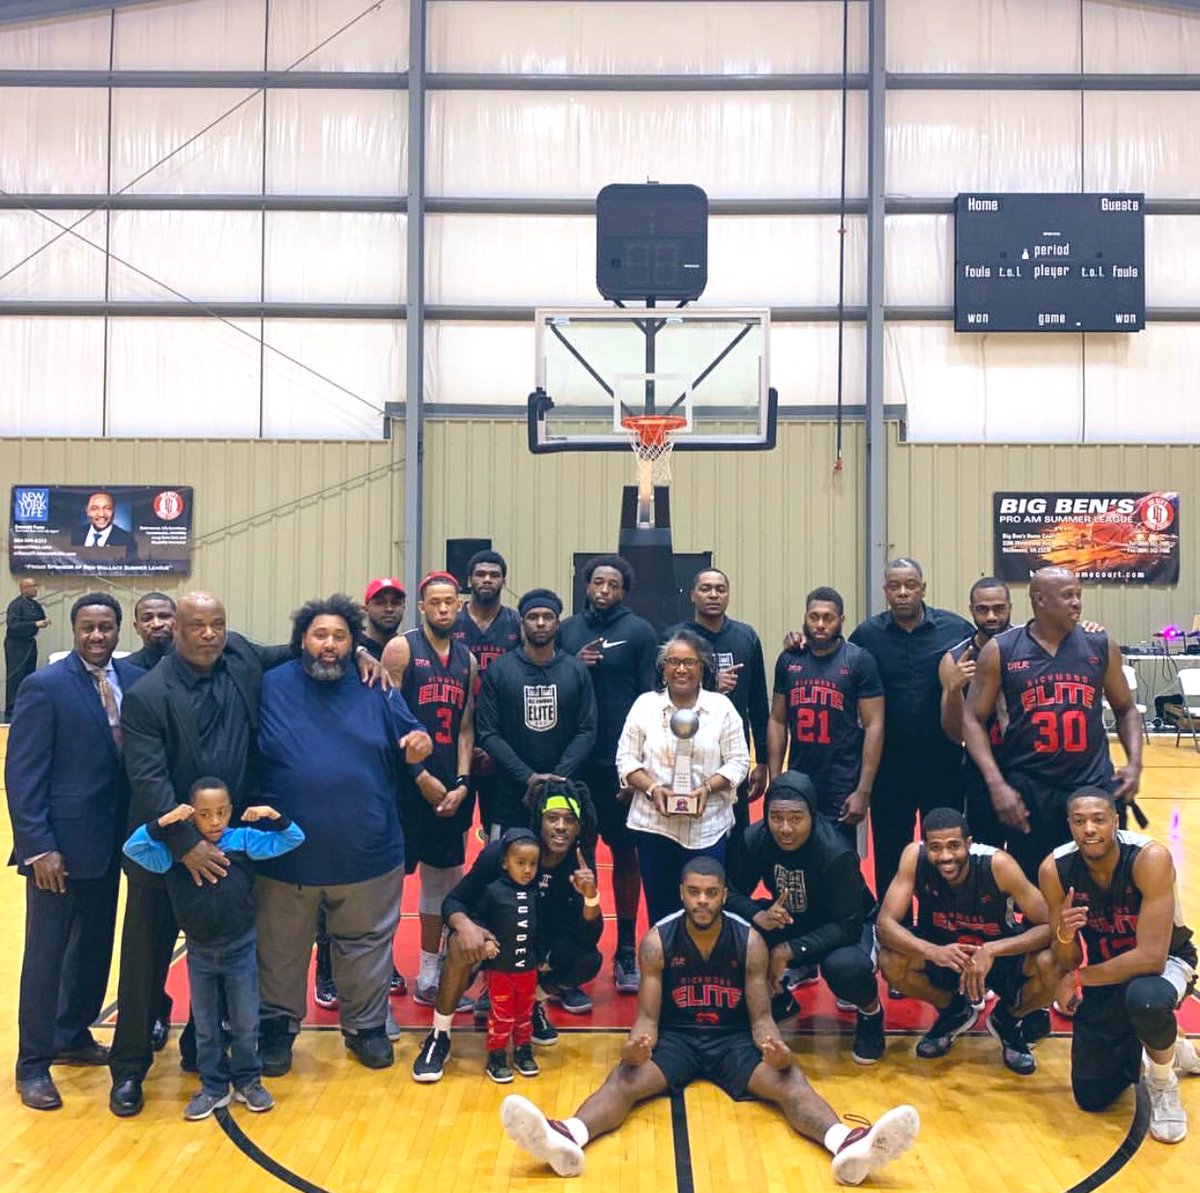 Championship Season ☑️ Congratulations to the @RichmondElite on being crowned 2018-19 ABA Regional Champs! #wooterapparel #aba #benwallacegym @ABAWEEKLY1